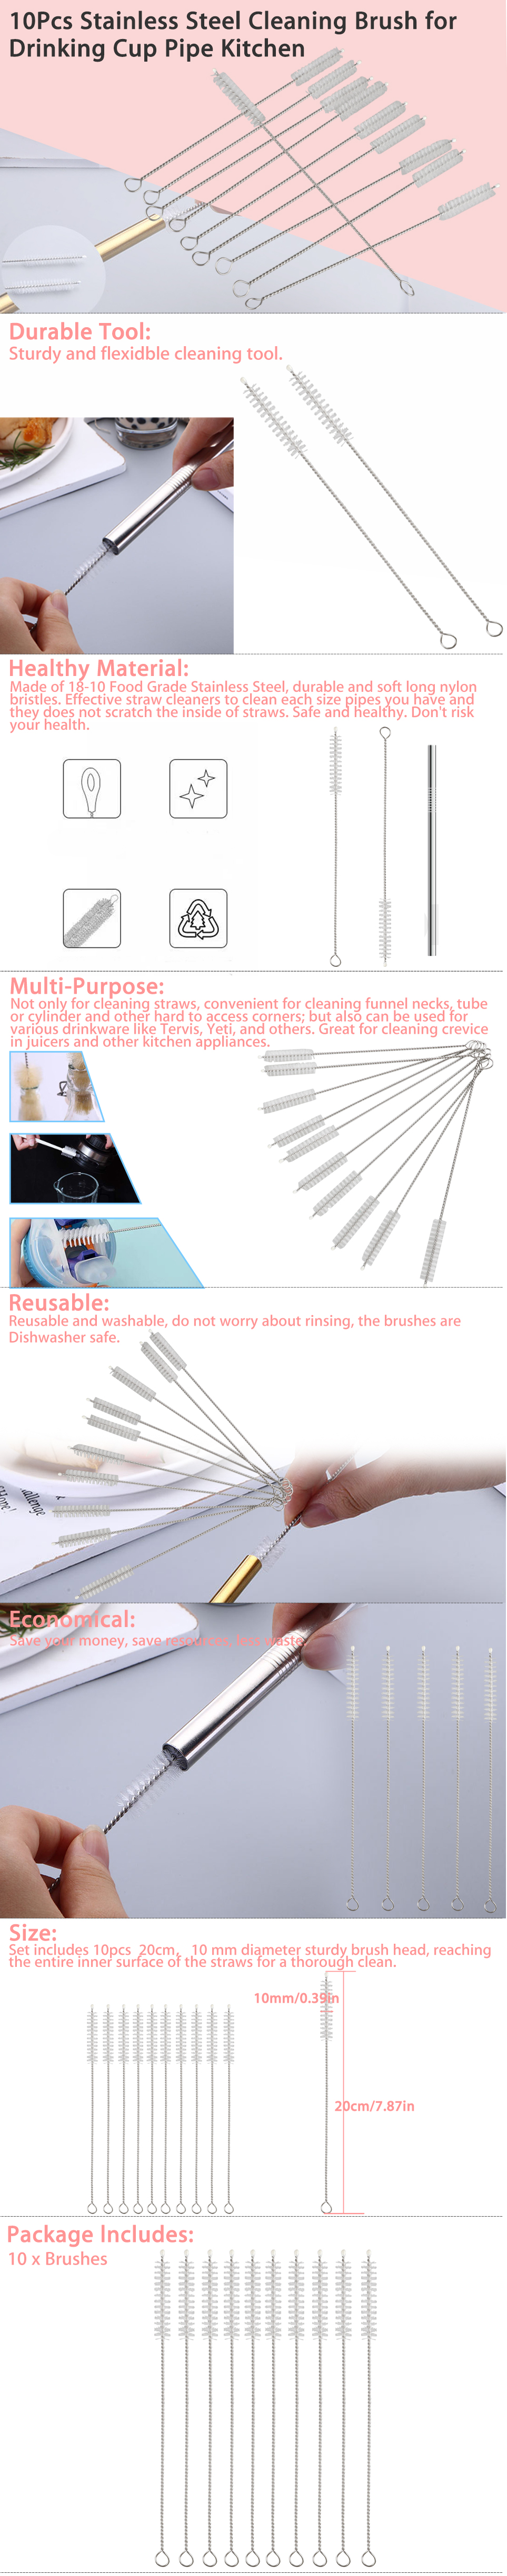 Drinking Straw Brush Kit 10 Piece Multi-functional Durable Sturdy but Soft Straw Cleaner Brush Reusable and Washable